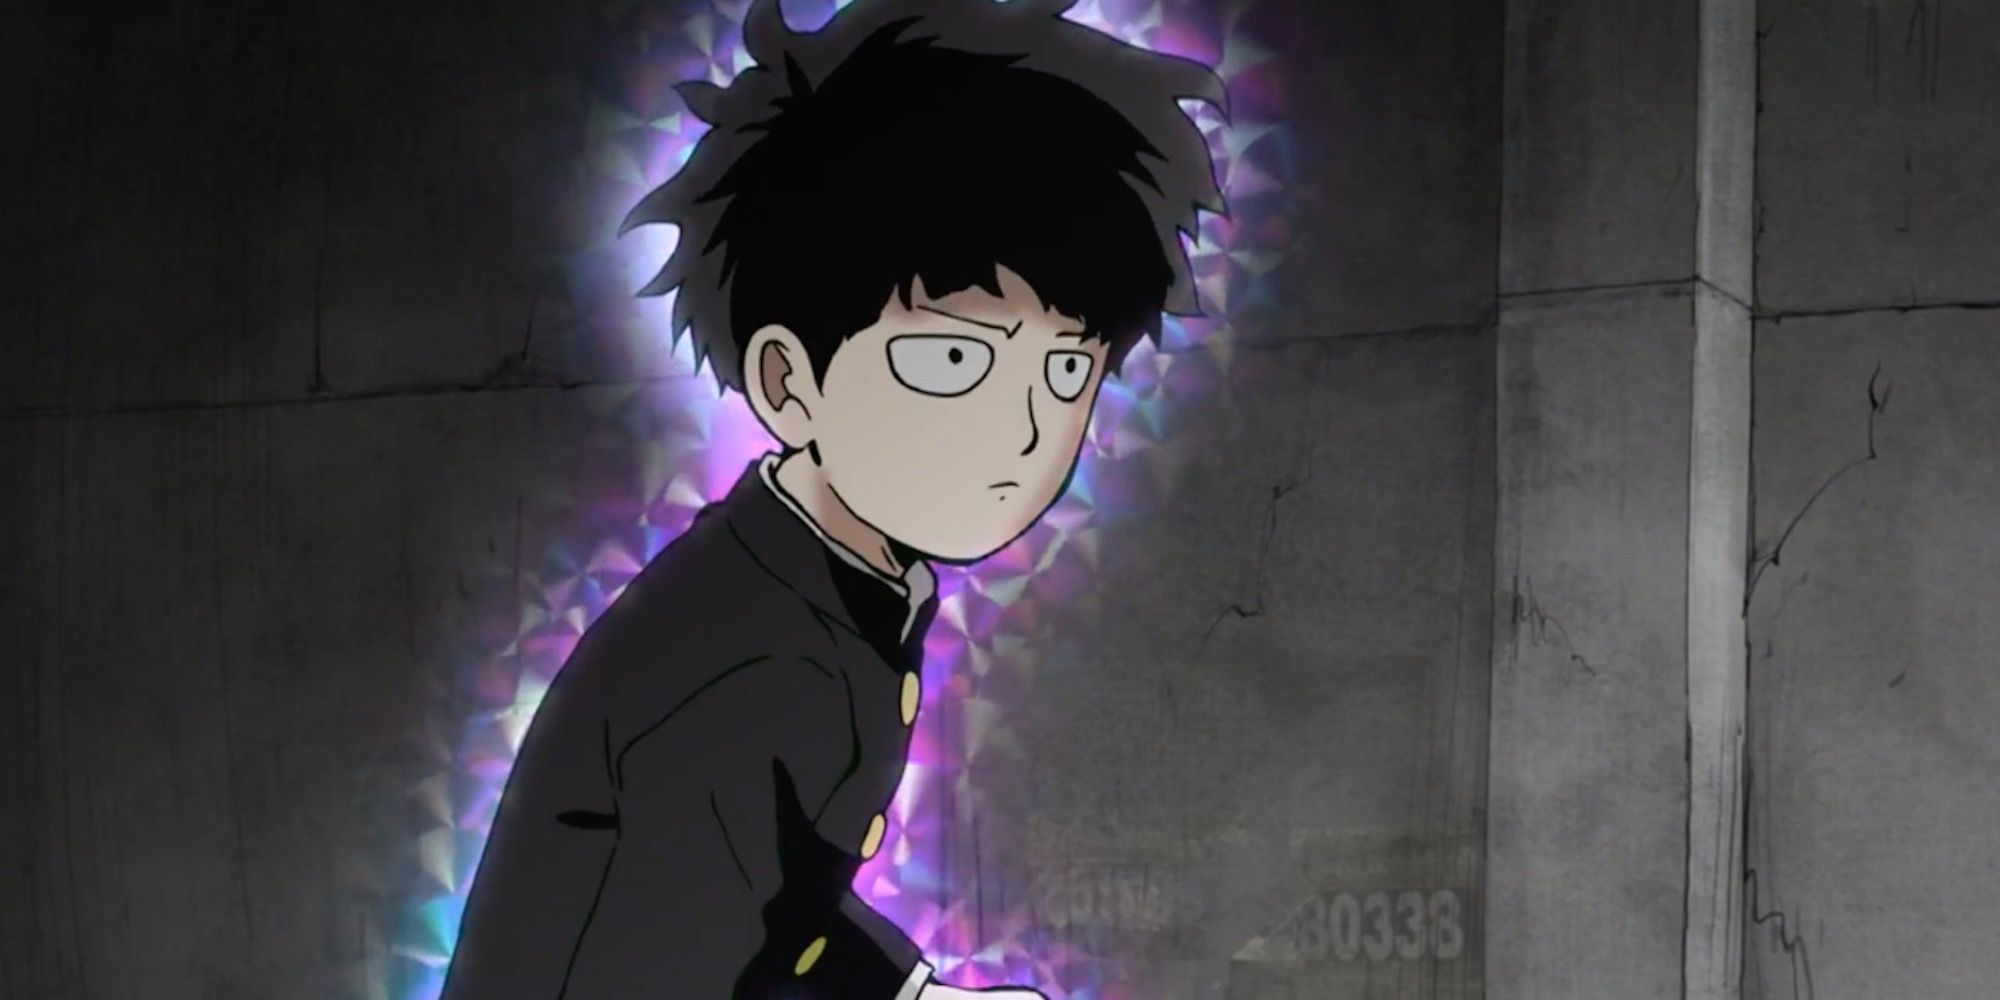 Mob in Mob Psycho 100